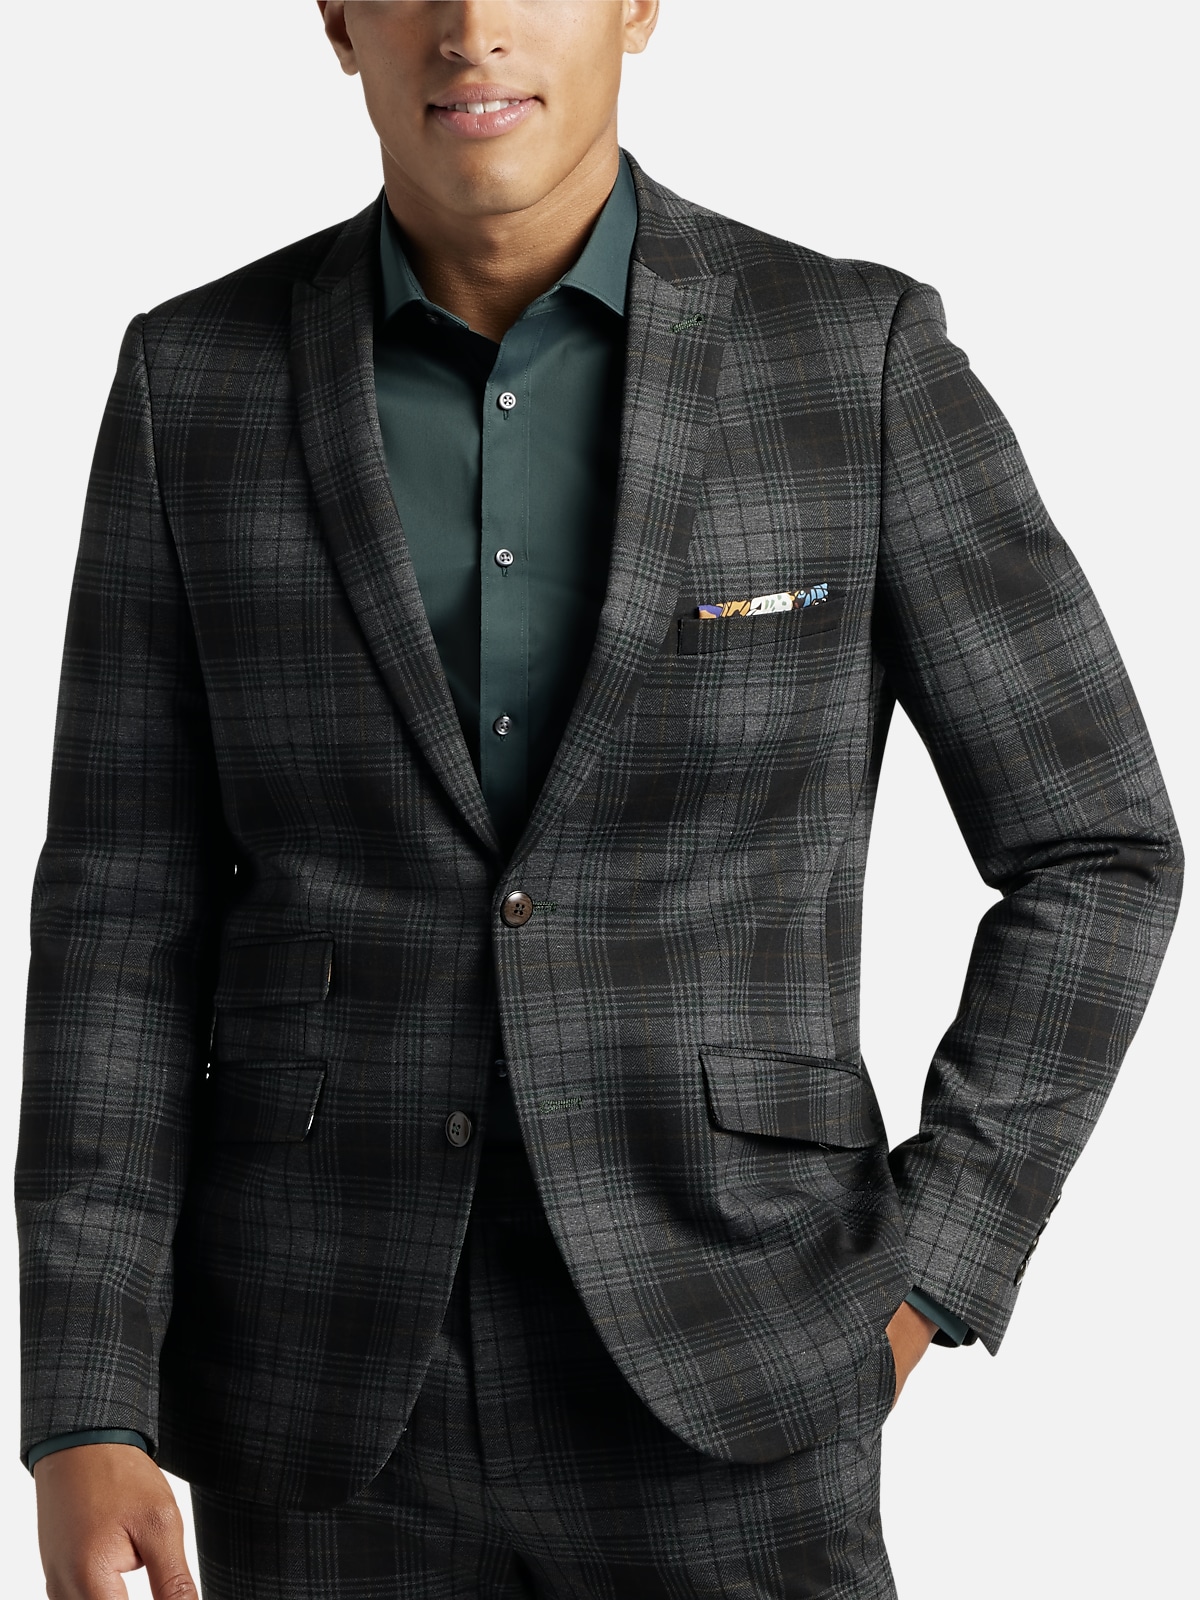 Jos. A. Bank Men's Tailored Fit Plaid Topcoat Clearance, Charcoal Plaid, 46 Long